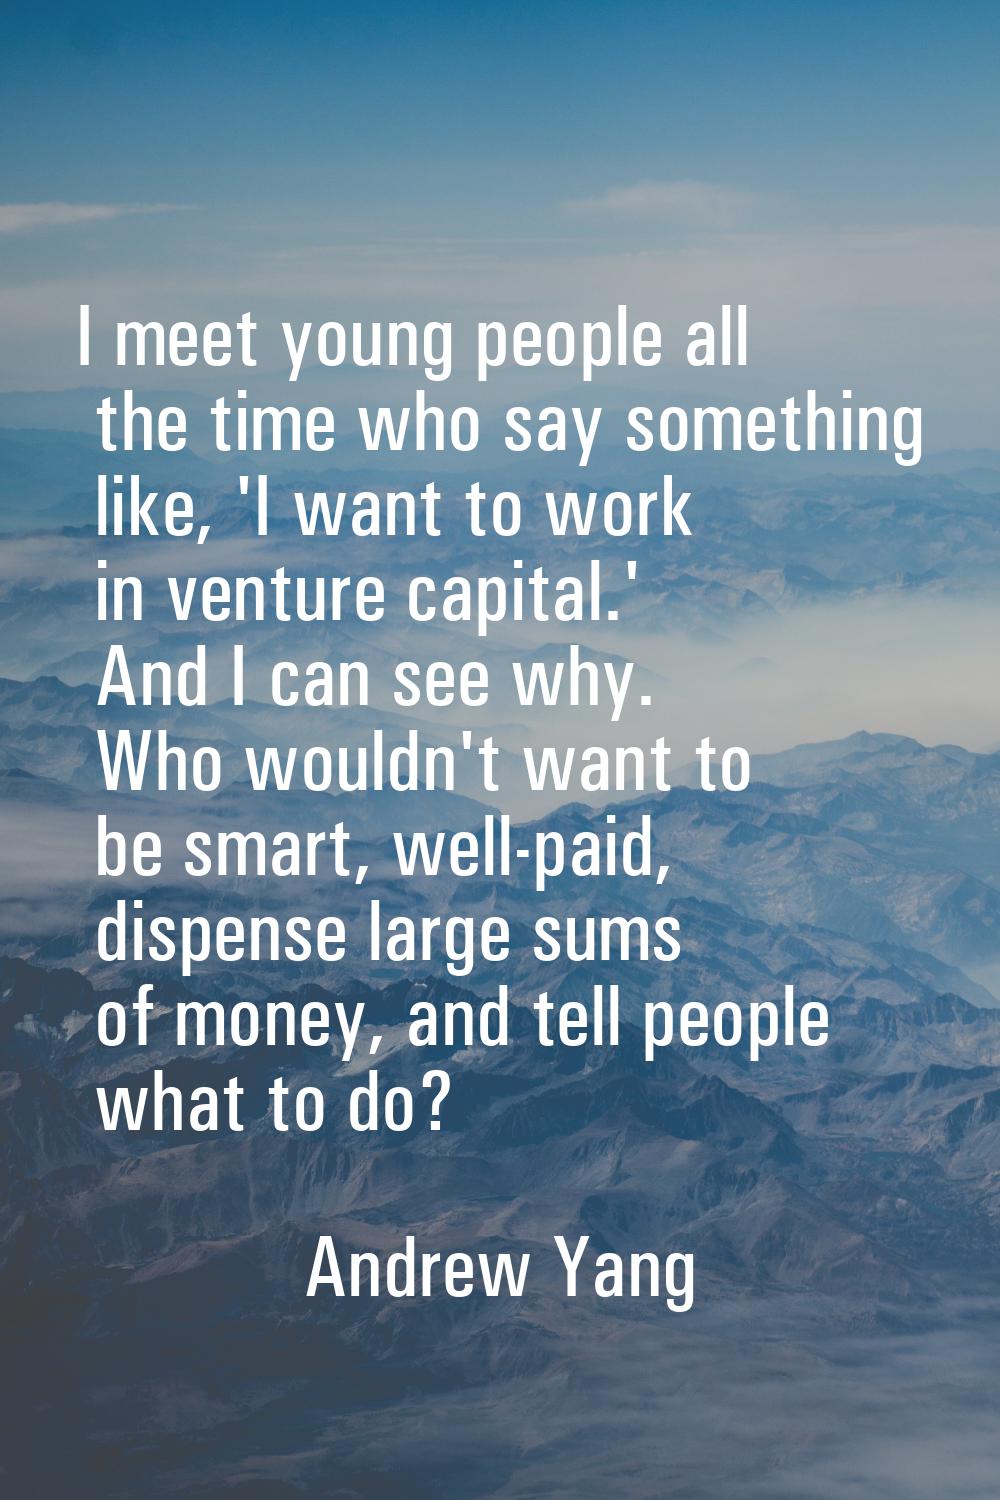 I meet young people all the time who say something like, 'I want to work in venture capital.' And I